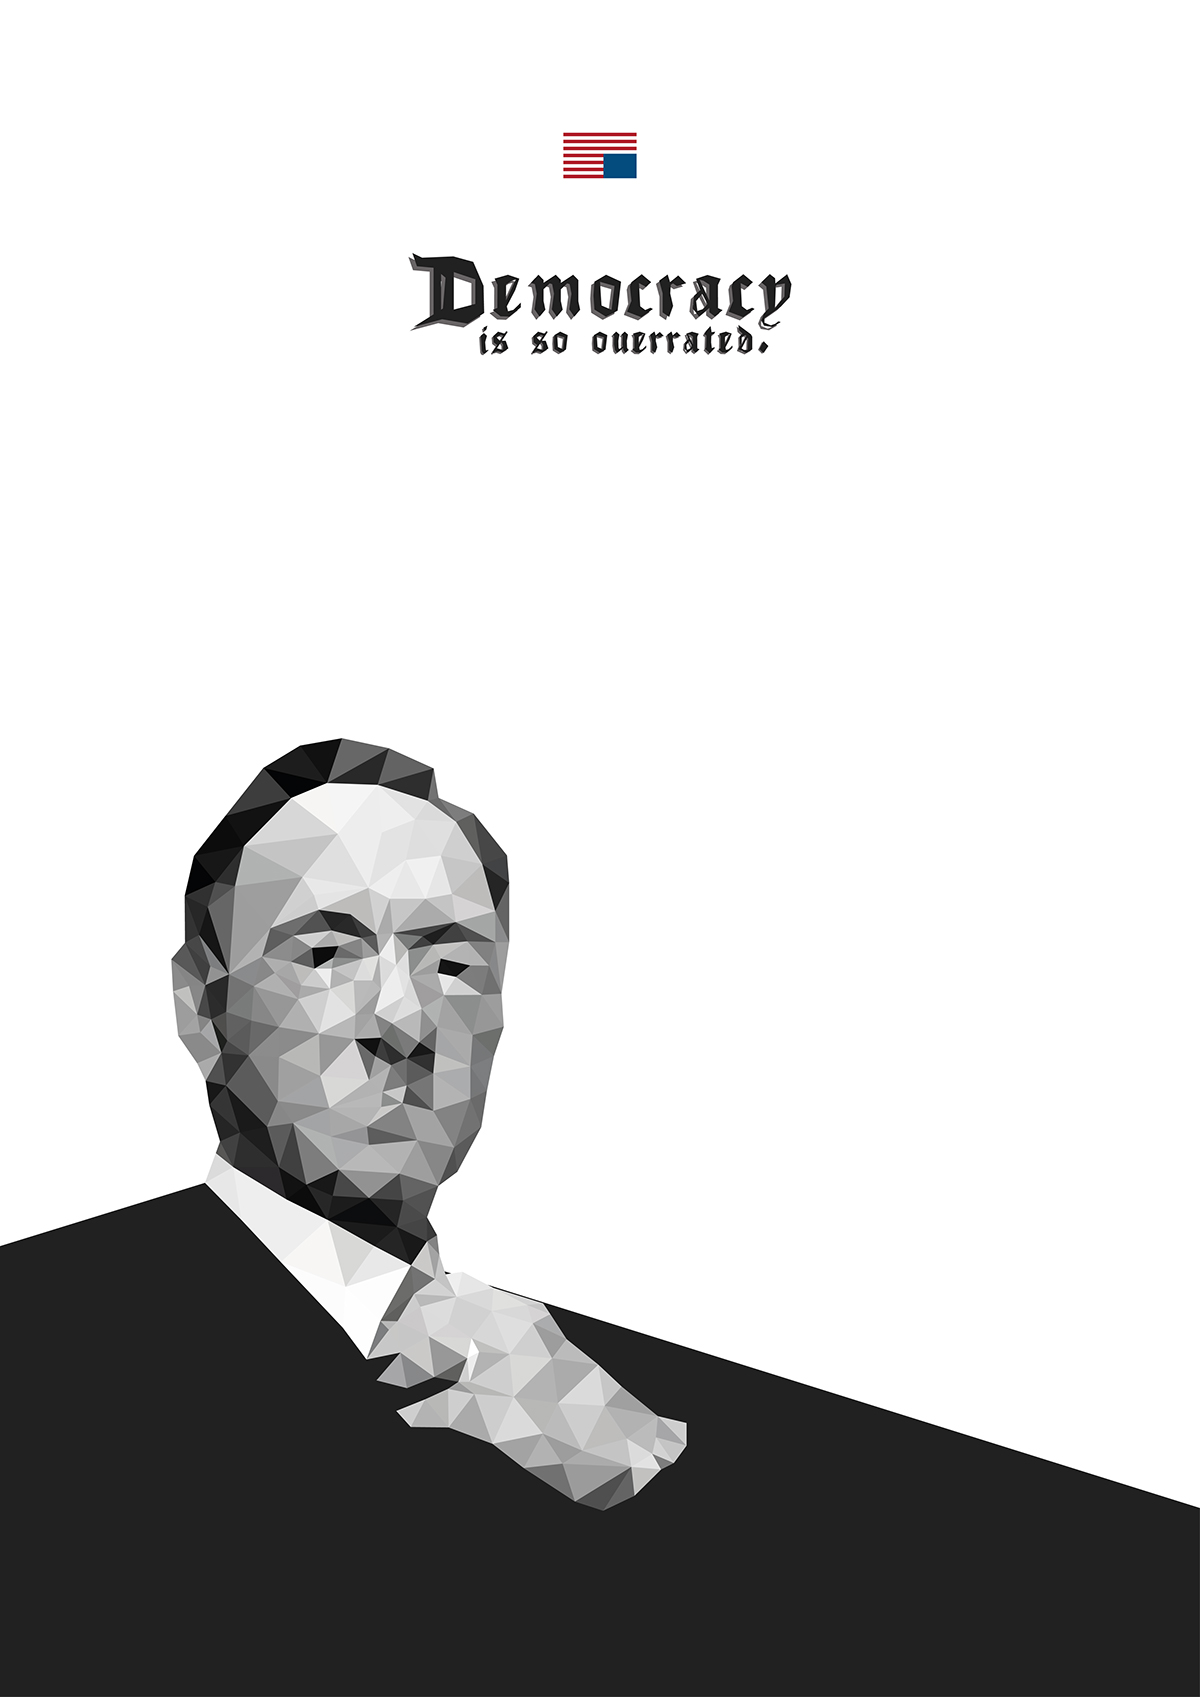 house of cards Kevin Spacey poster democracy Low Poly